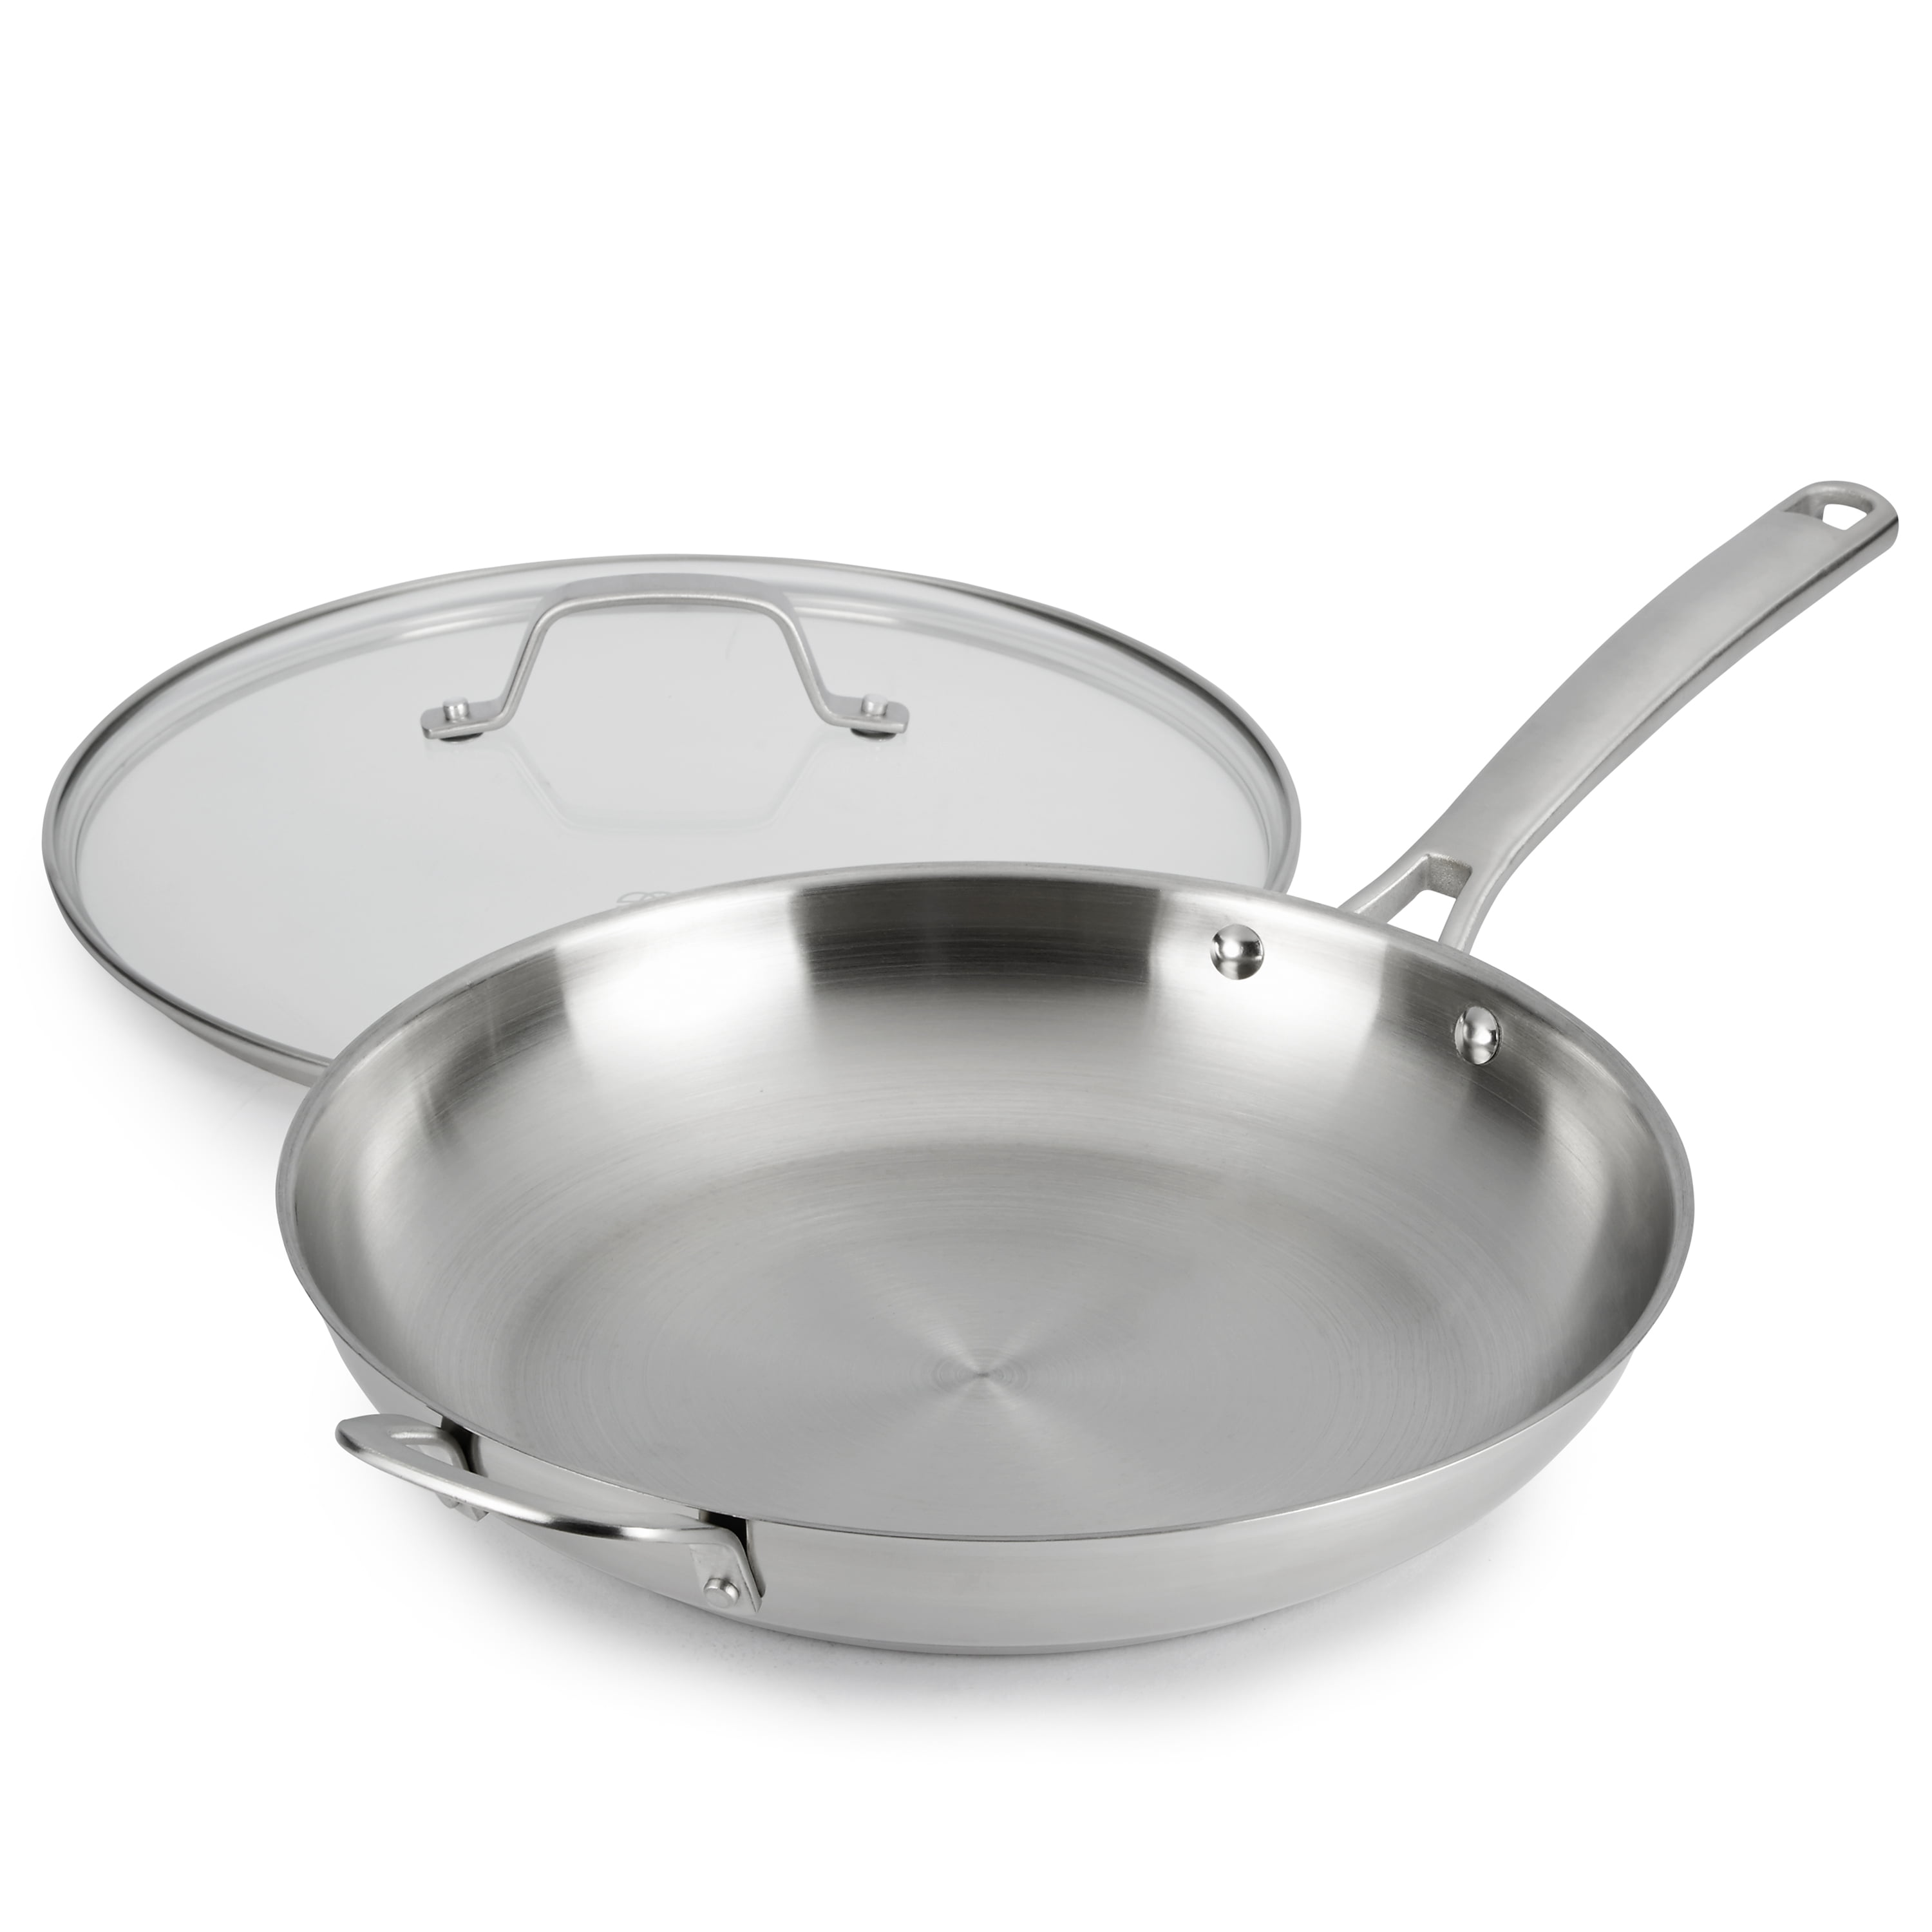 Calphalon Stainless Steel 12 Inch Pan